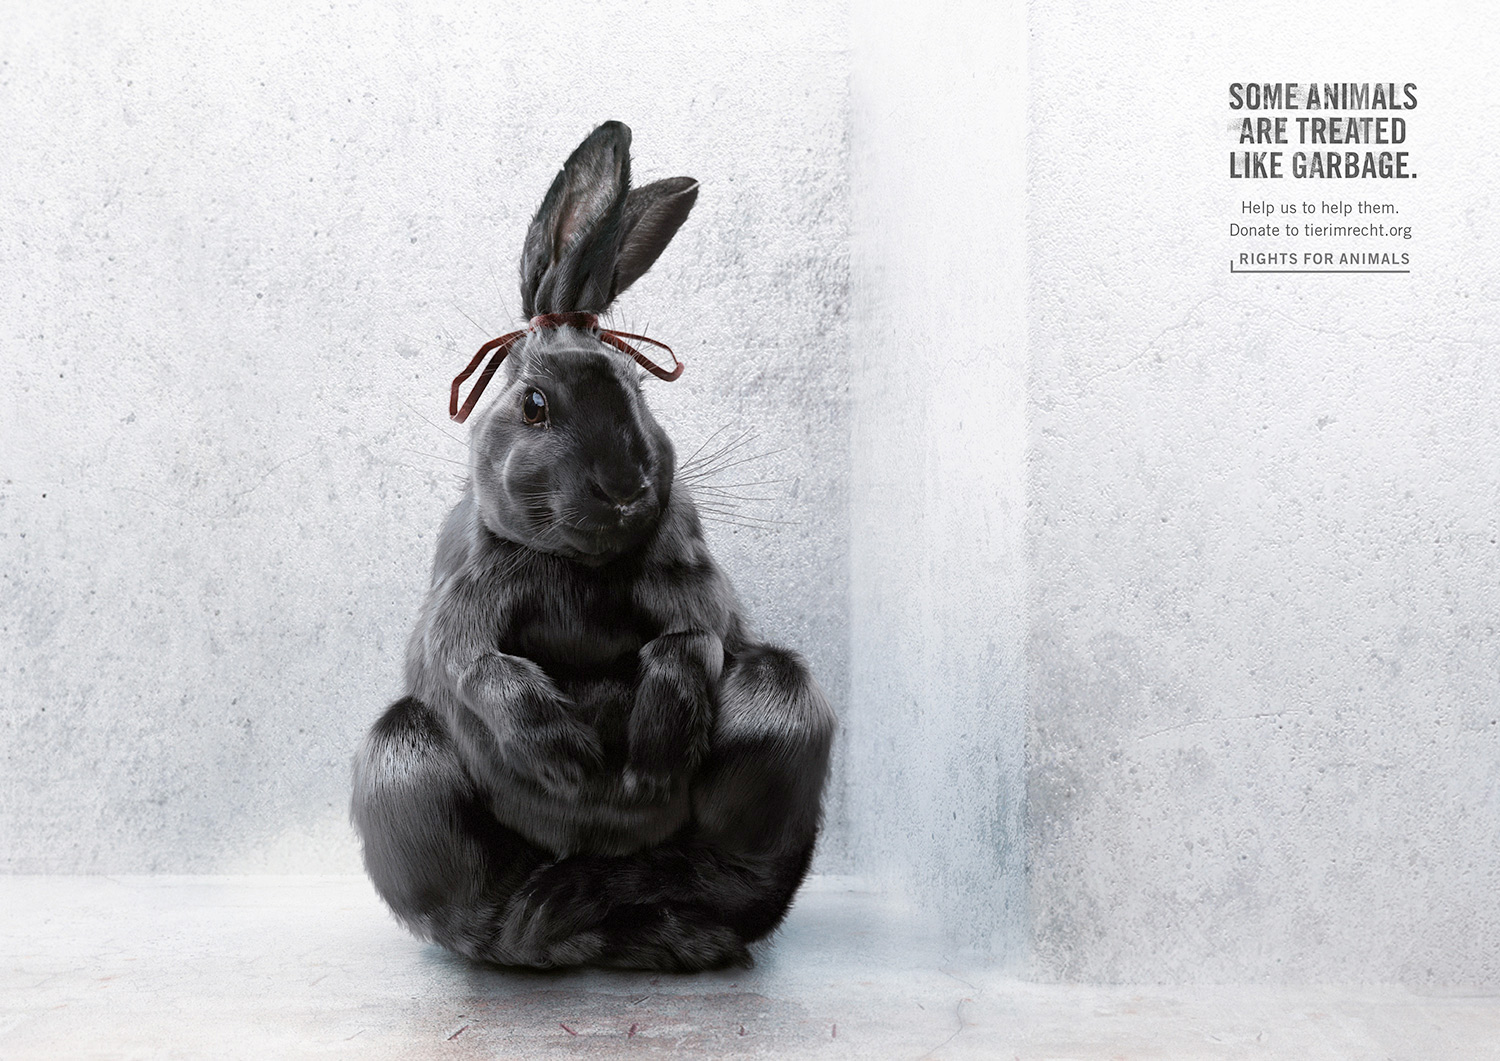 Foundation Tier im Recht launches new campaign against animal cruelty –  Campaigns of the World®